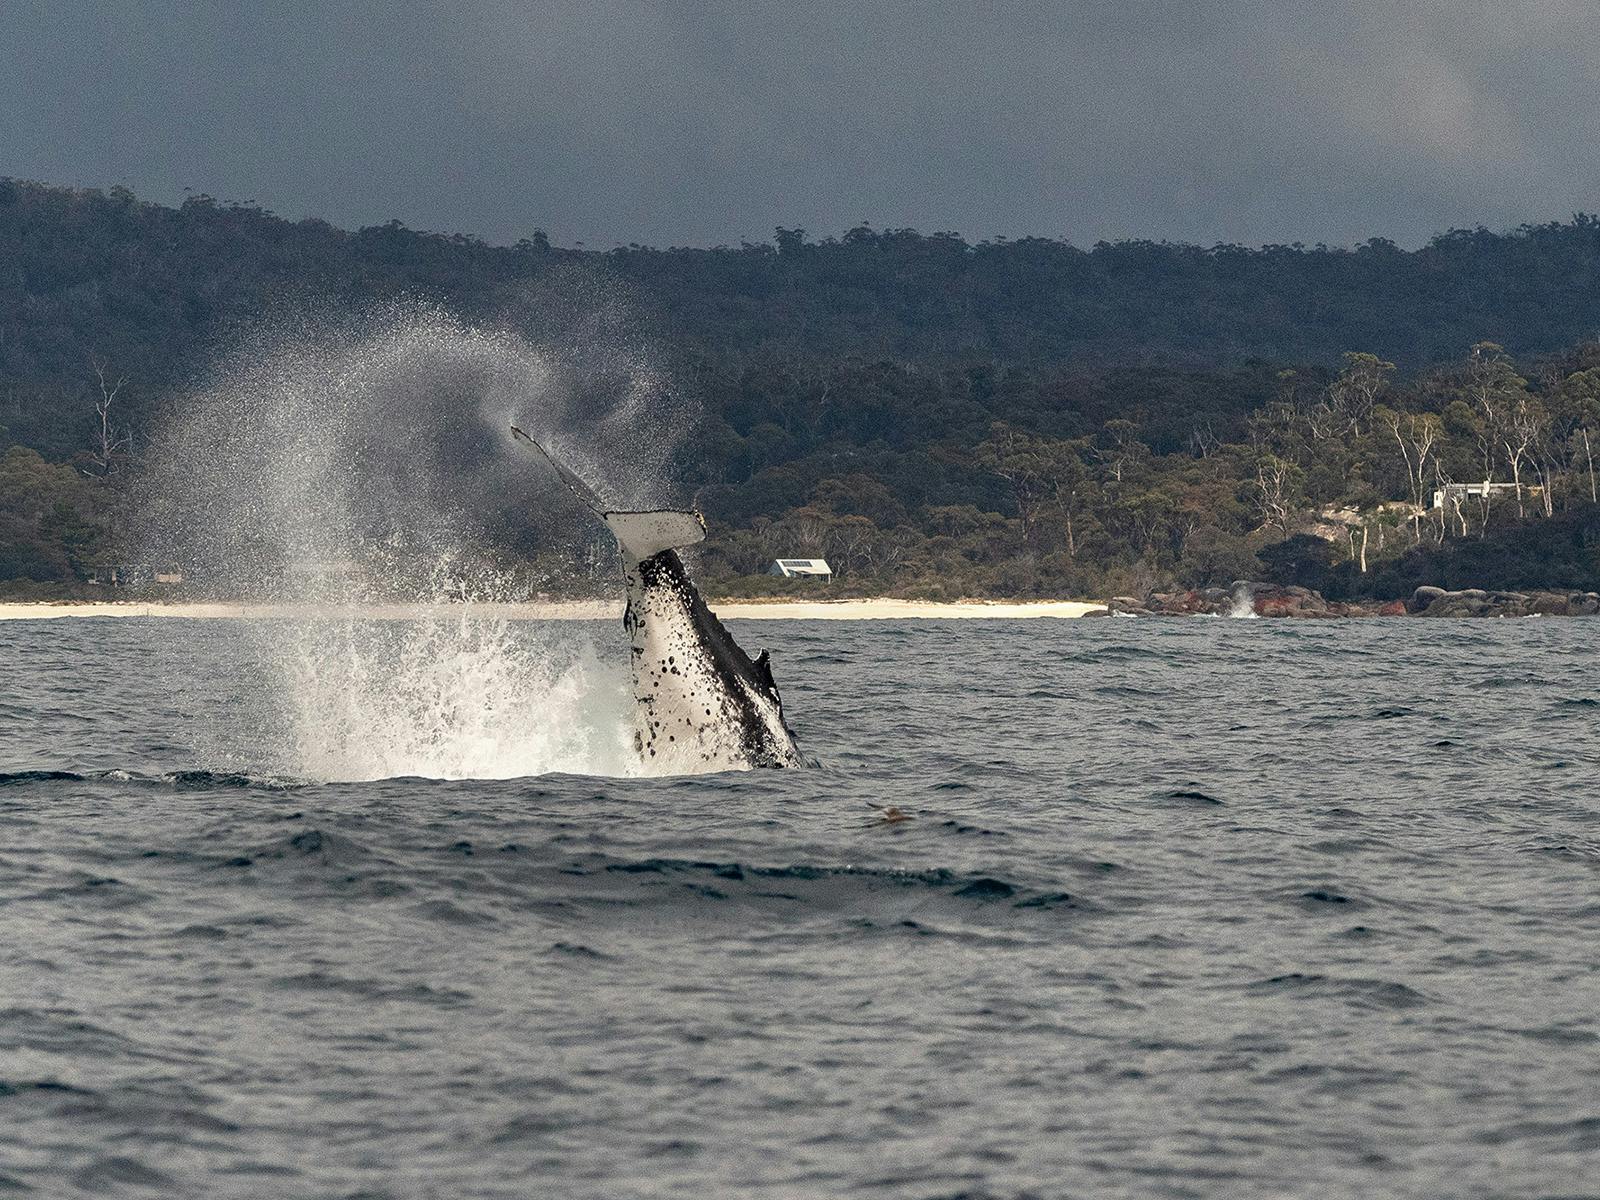 Humpback Whales, captured during the Bay of Fires Photography Workshop